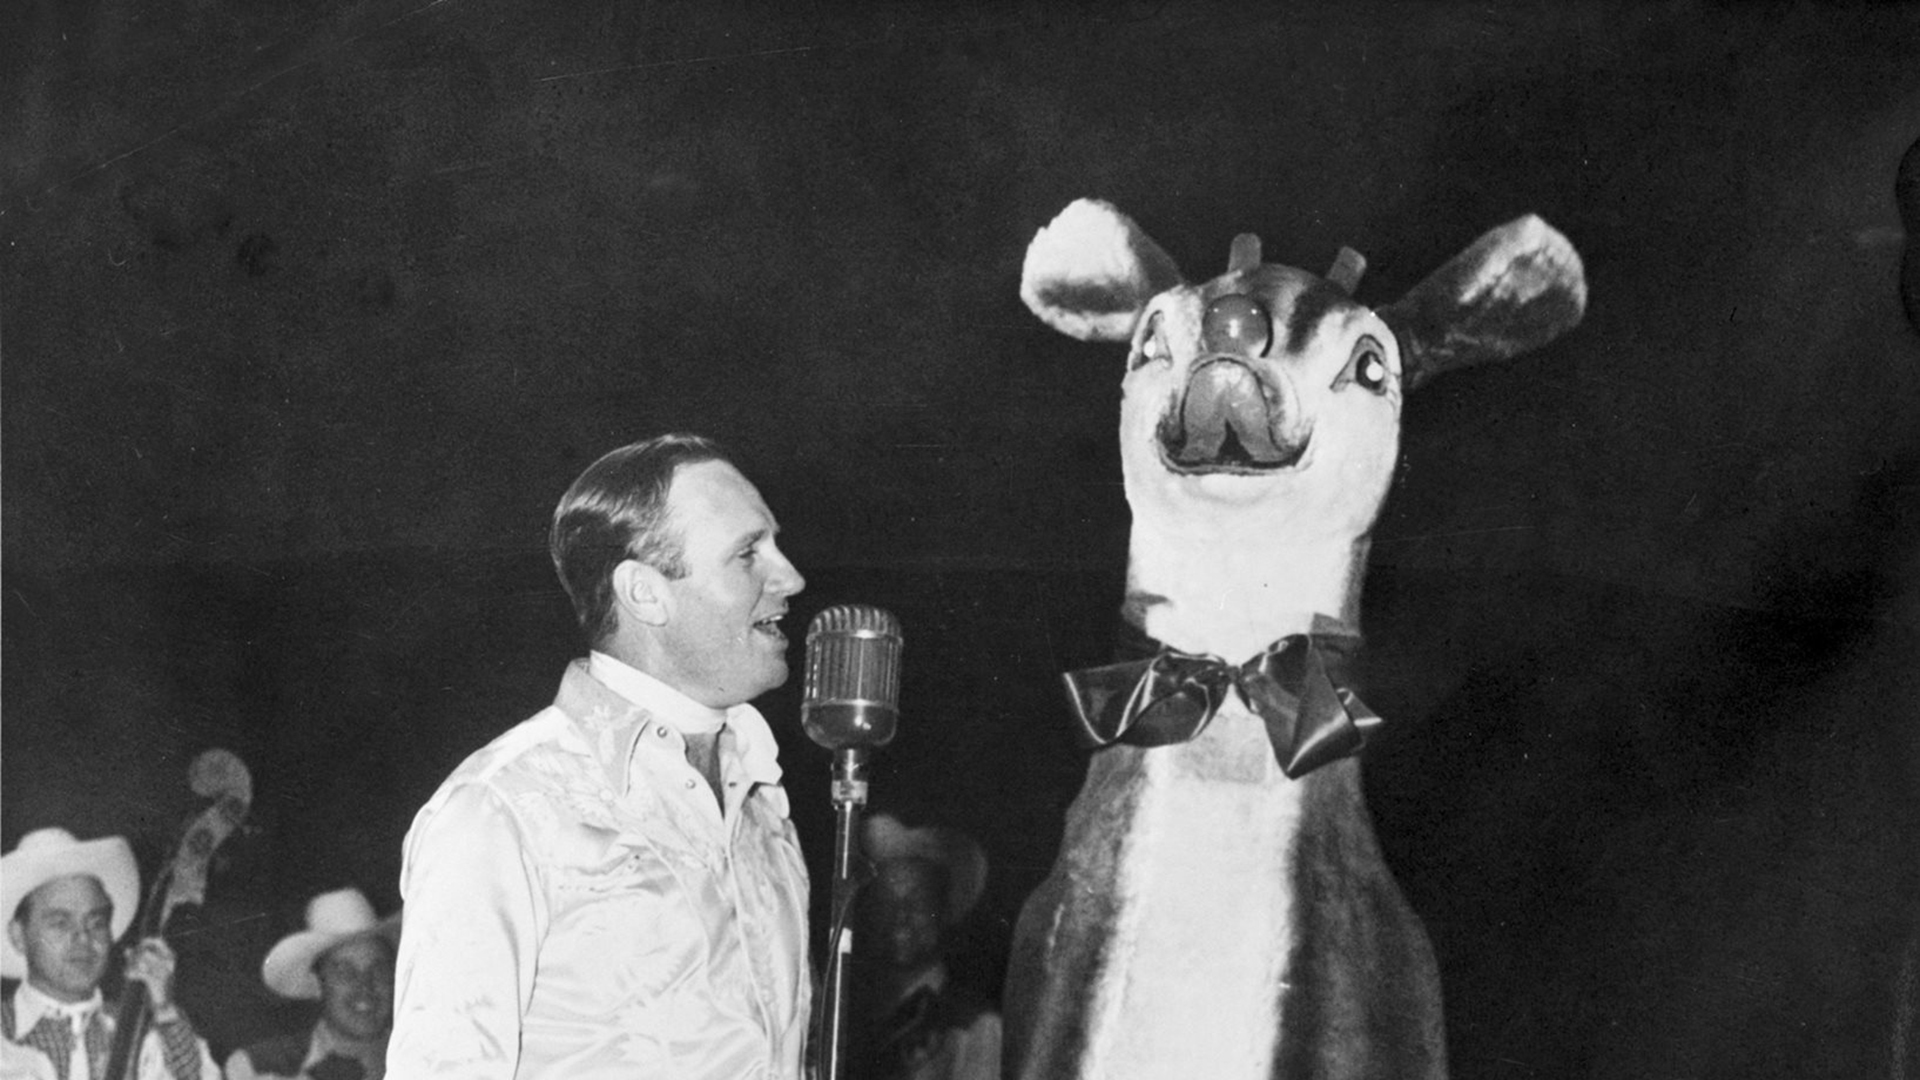 Gene Autry and Rudolph the Red-Nosed Reindeer